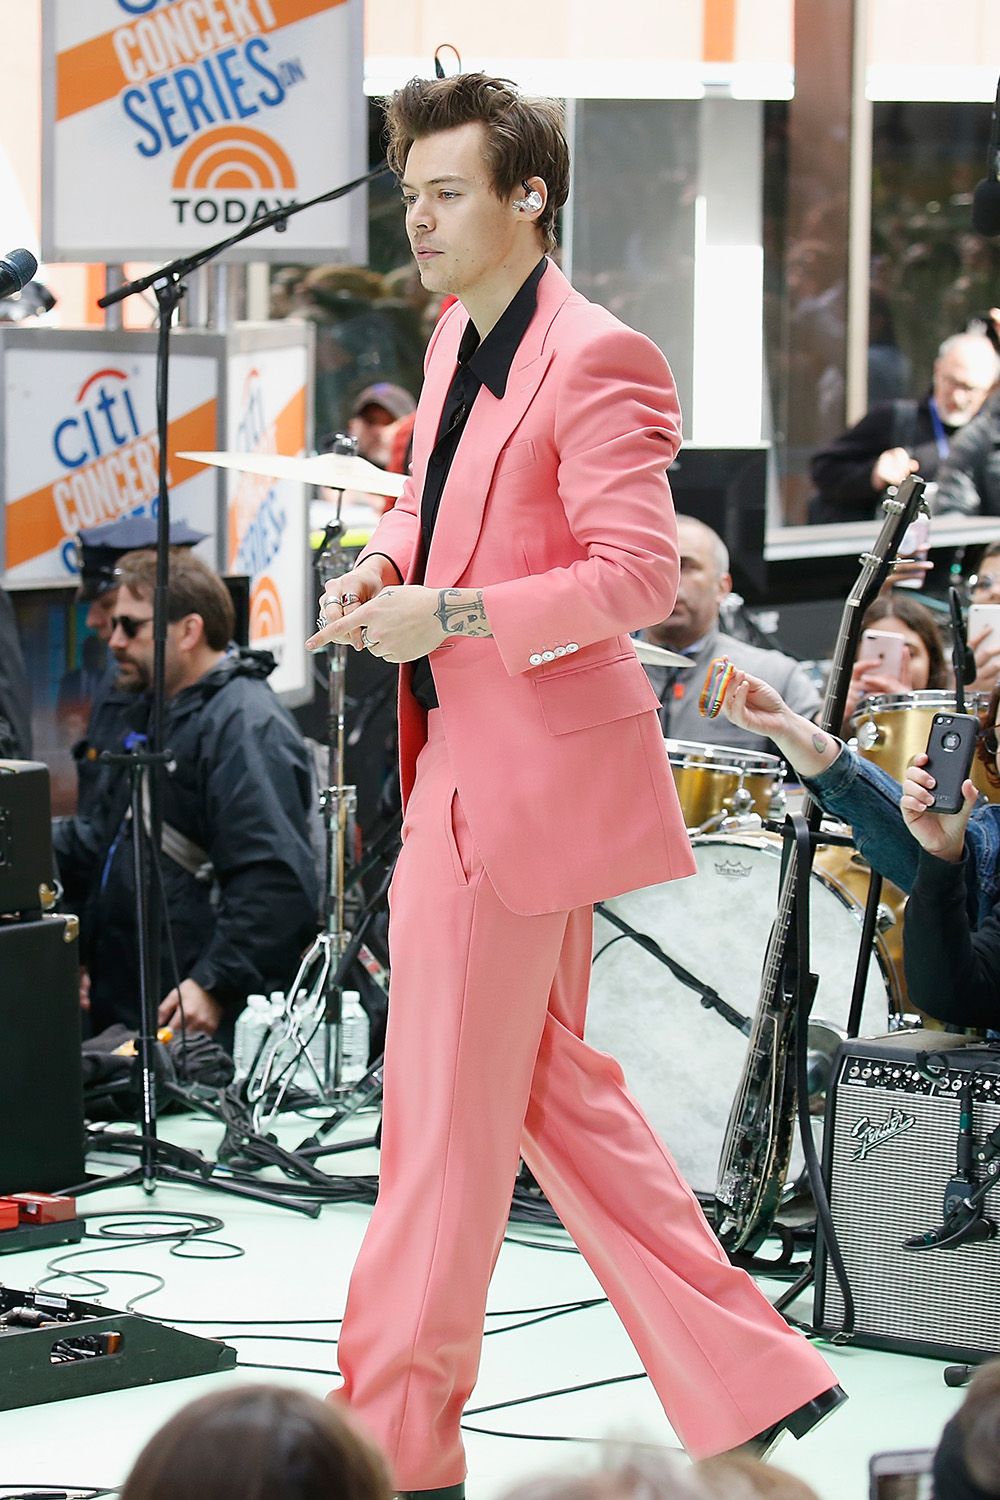 Harry Styles in a Millennial Pink Suit